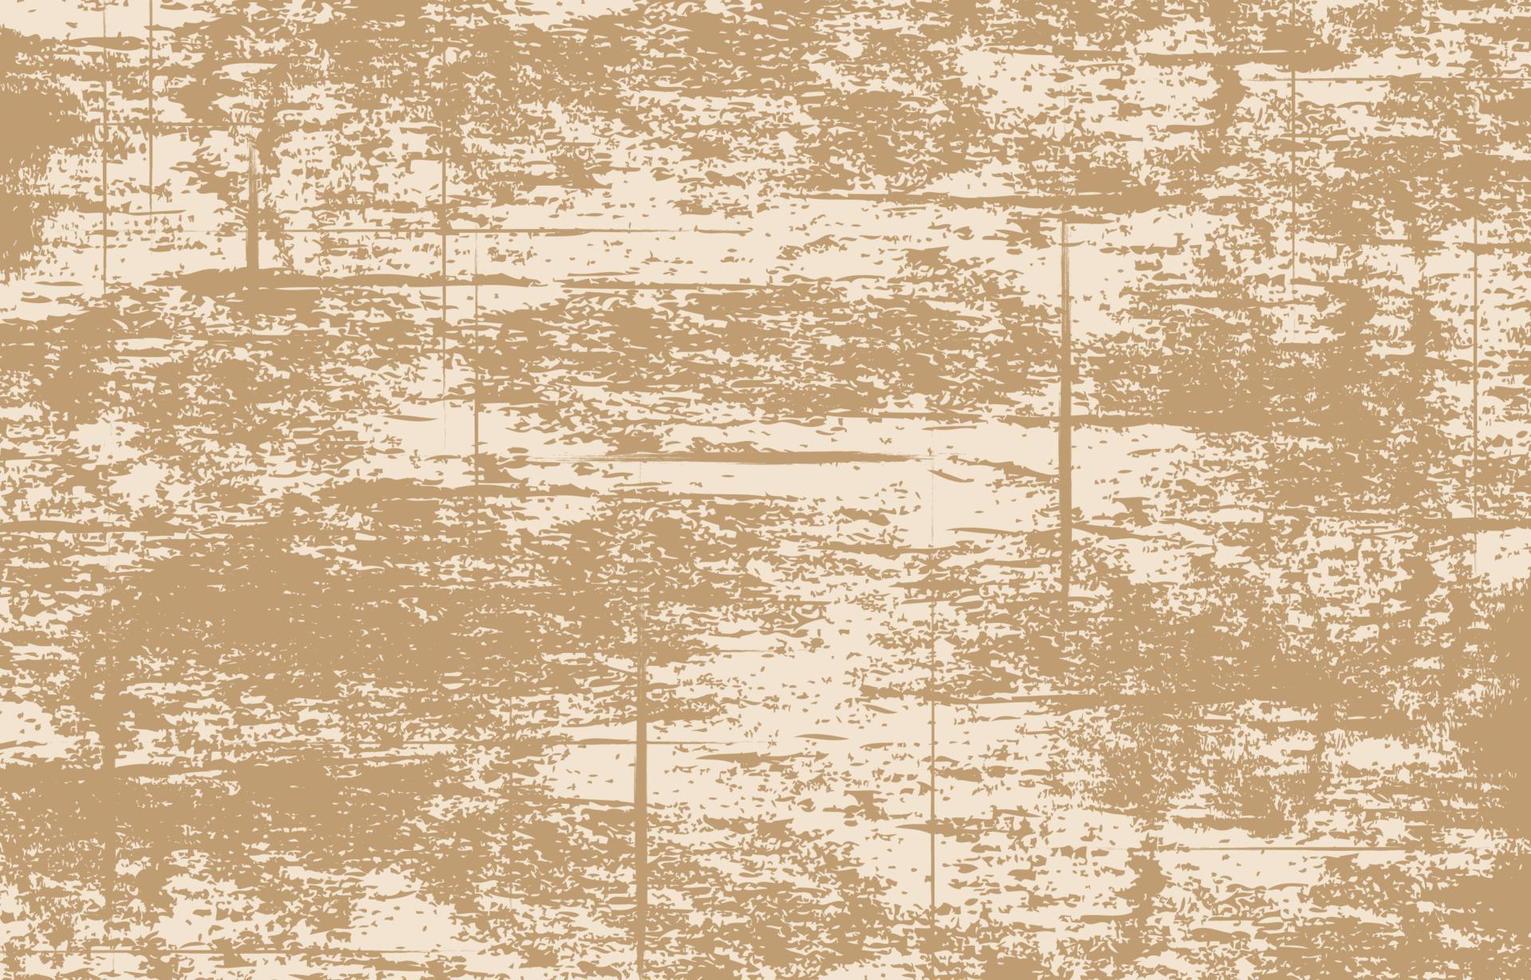 Dirty Rust Background vector